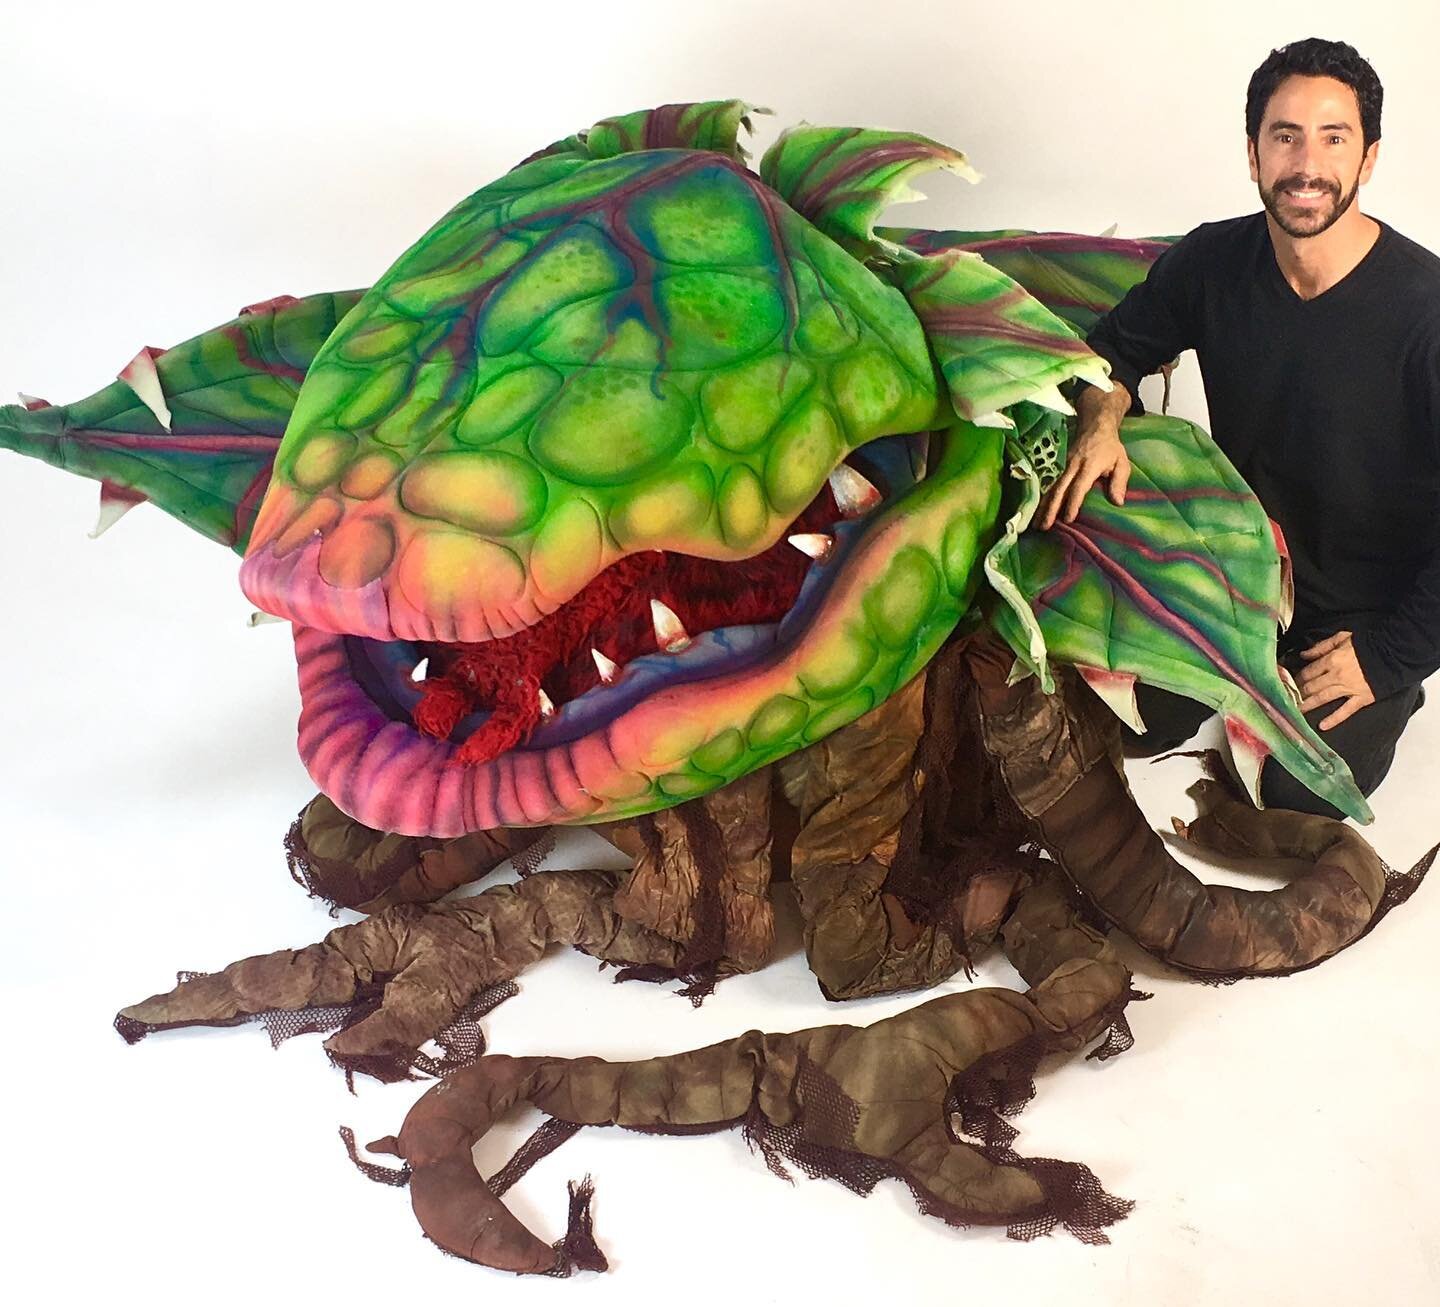 Little Shop of Horrors Puppet Rentals. This is the 3rd Audrey plant puppet of 4 altogether. There are 2 smaller ones and one large beast. DM me for a quote.😉 my bro Paul made these with his talented crew at McAvene Designs. That&rsquo;s where I lear